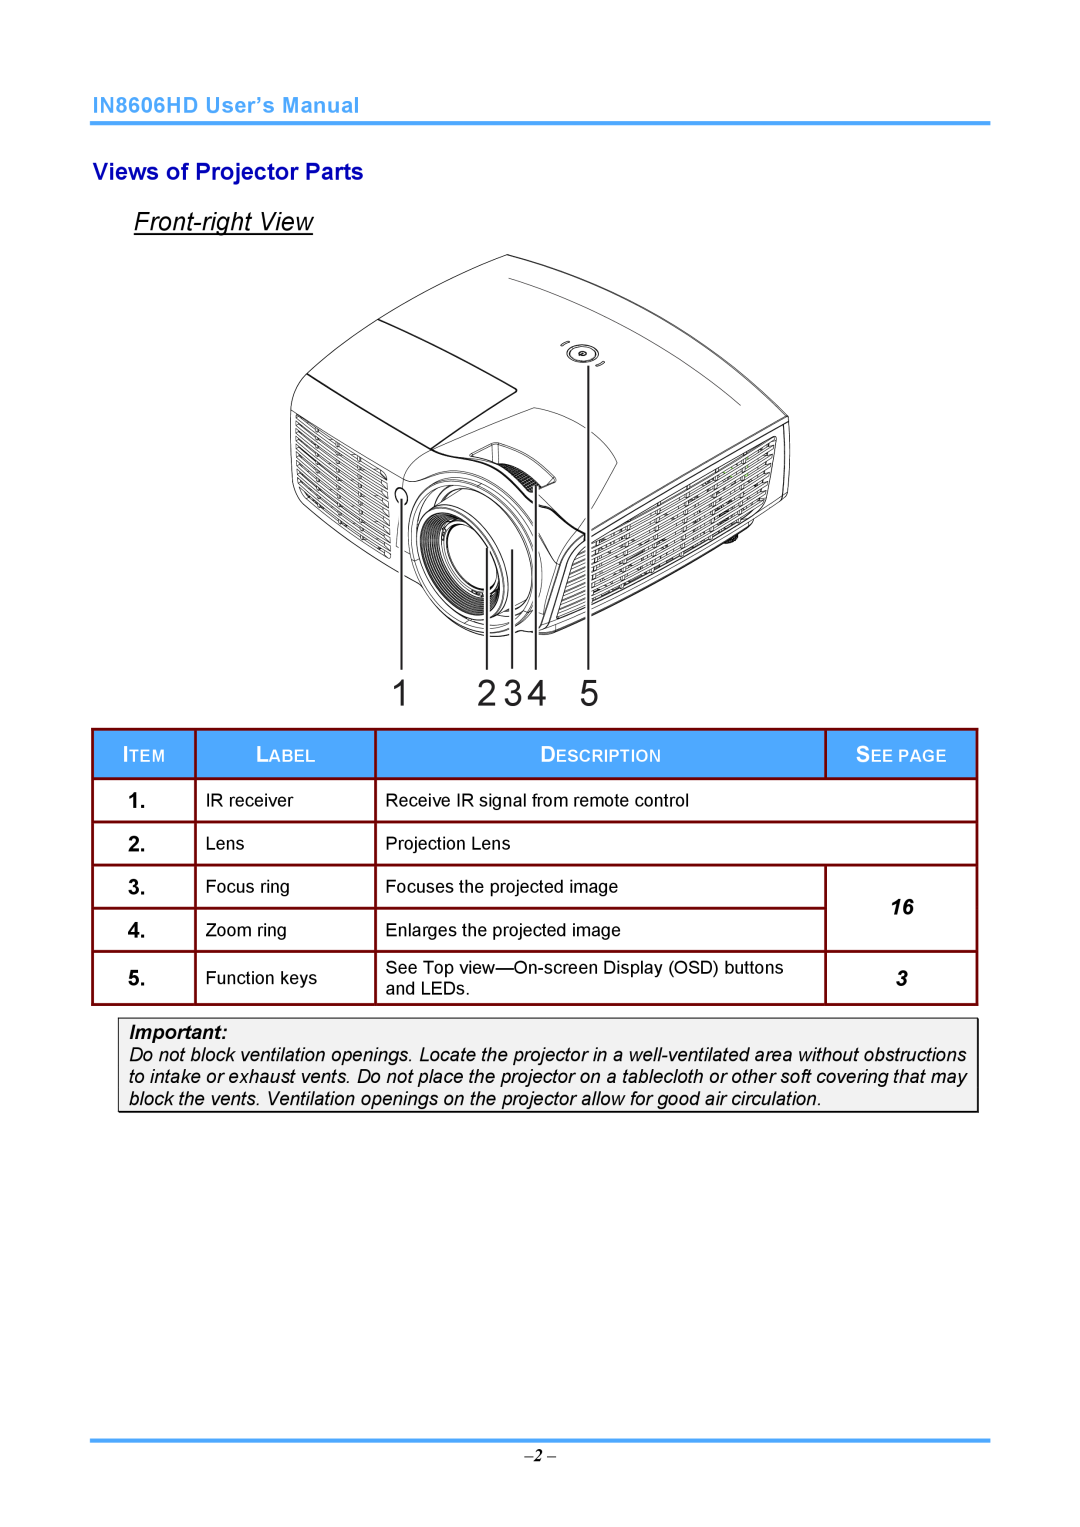 InFocus IN8606HD manual Front-rightView, Views of Projector Parts 